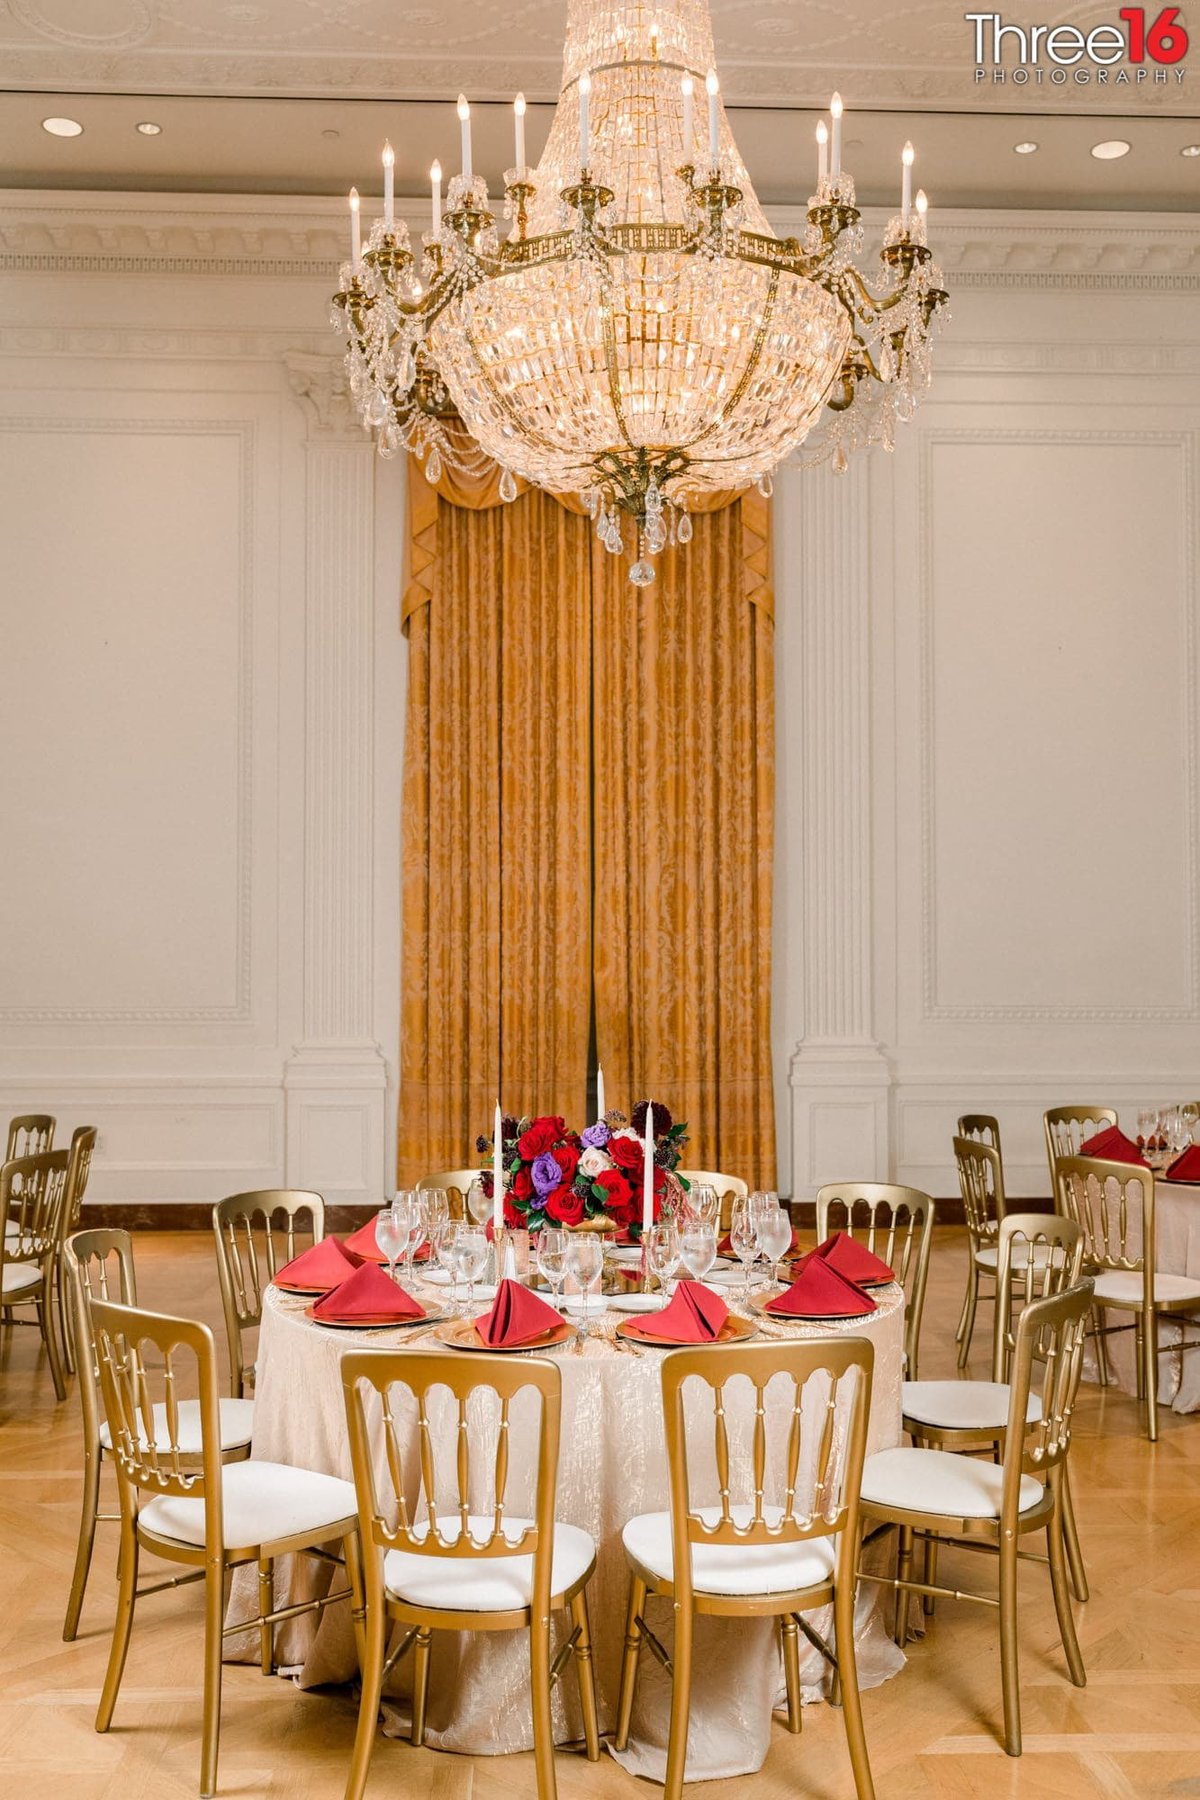 Richard Nixon Library wedding reception table display with long vertical drapes in the background